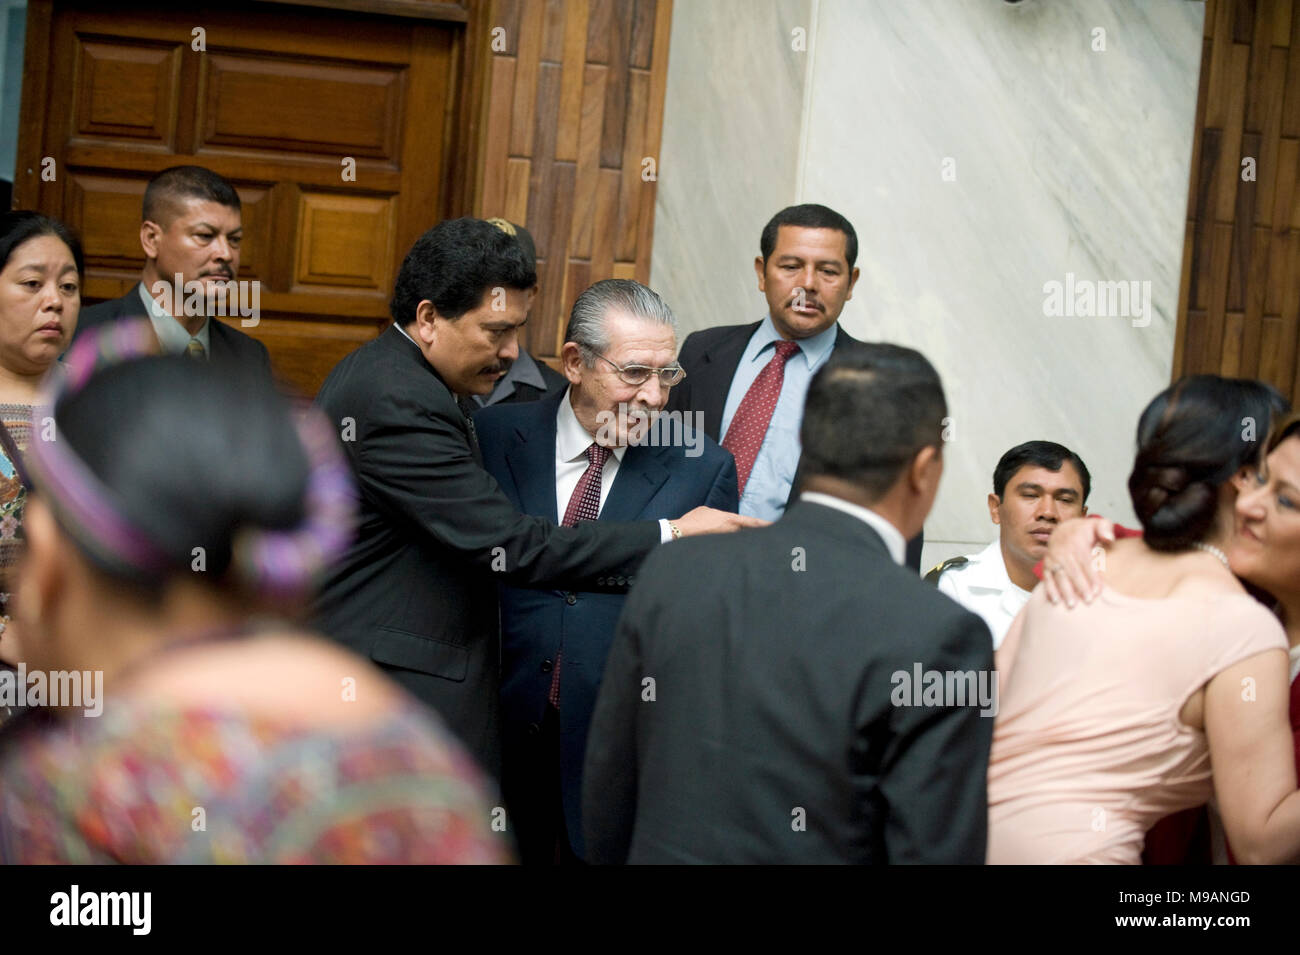 Former Guatemalan dictator Efrain Rios Montt enters the court as his genocide trial starts in the Supreme Court of Justice in Guatemala City March 19 2013. Montt is accused of charges of genocide and crimes against humanity during his 1982-1983 rule. Stock Photo